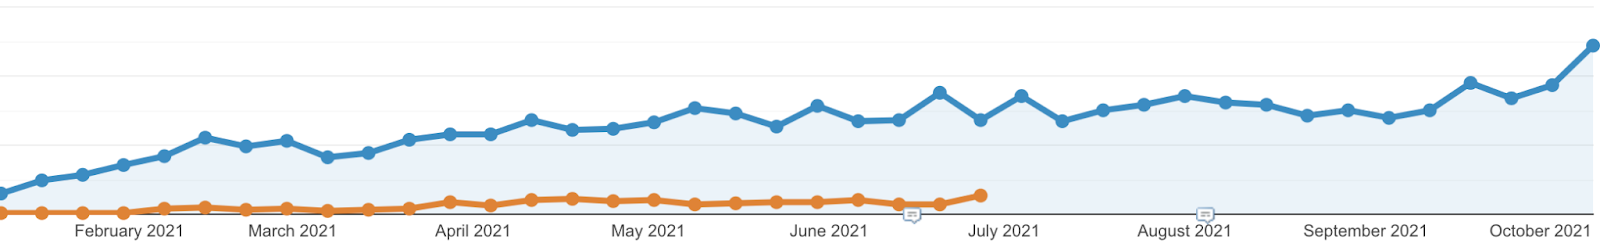 Google Analytics data from the last 9 months vs the 5 months since strategy commenced YoY showing huge growth